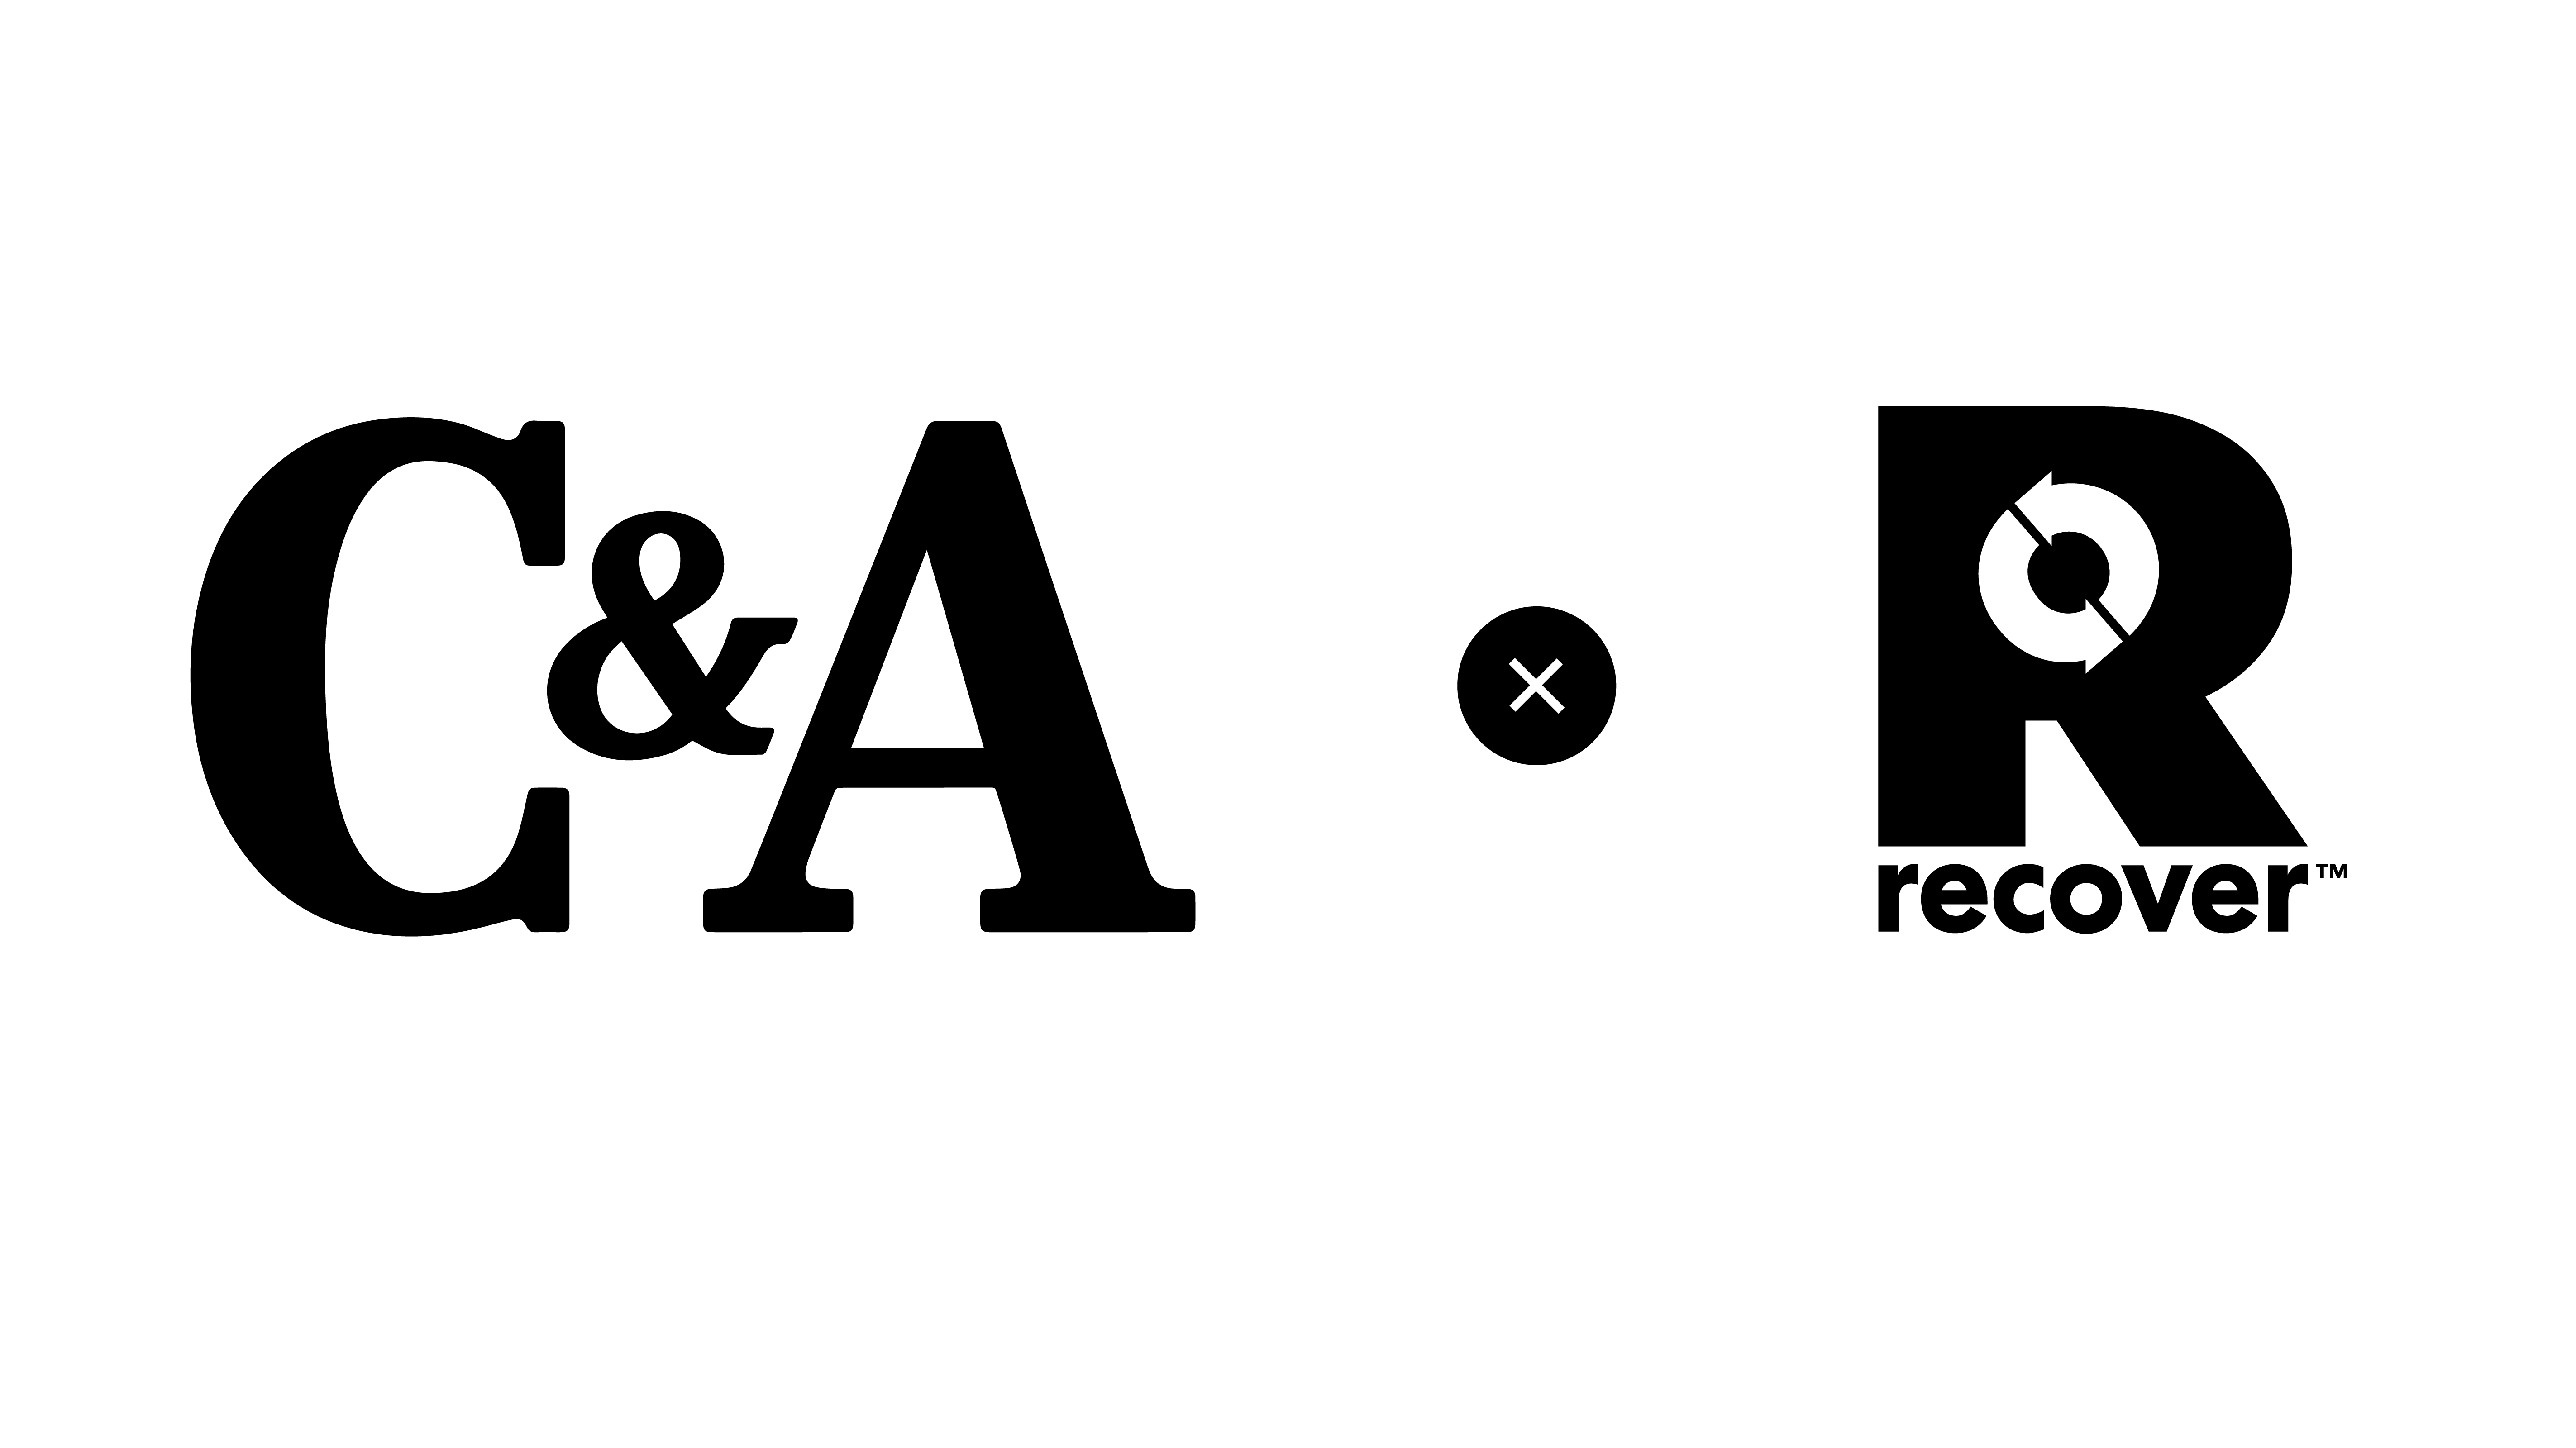 C&A Launches New Collection With Recover™ to Bring High-quality